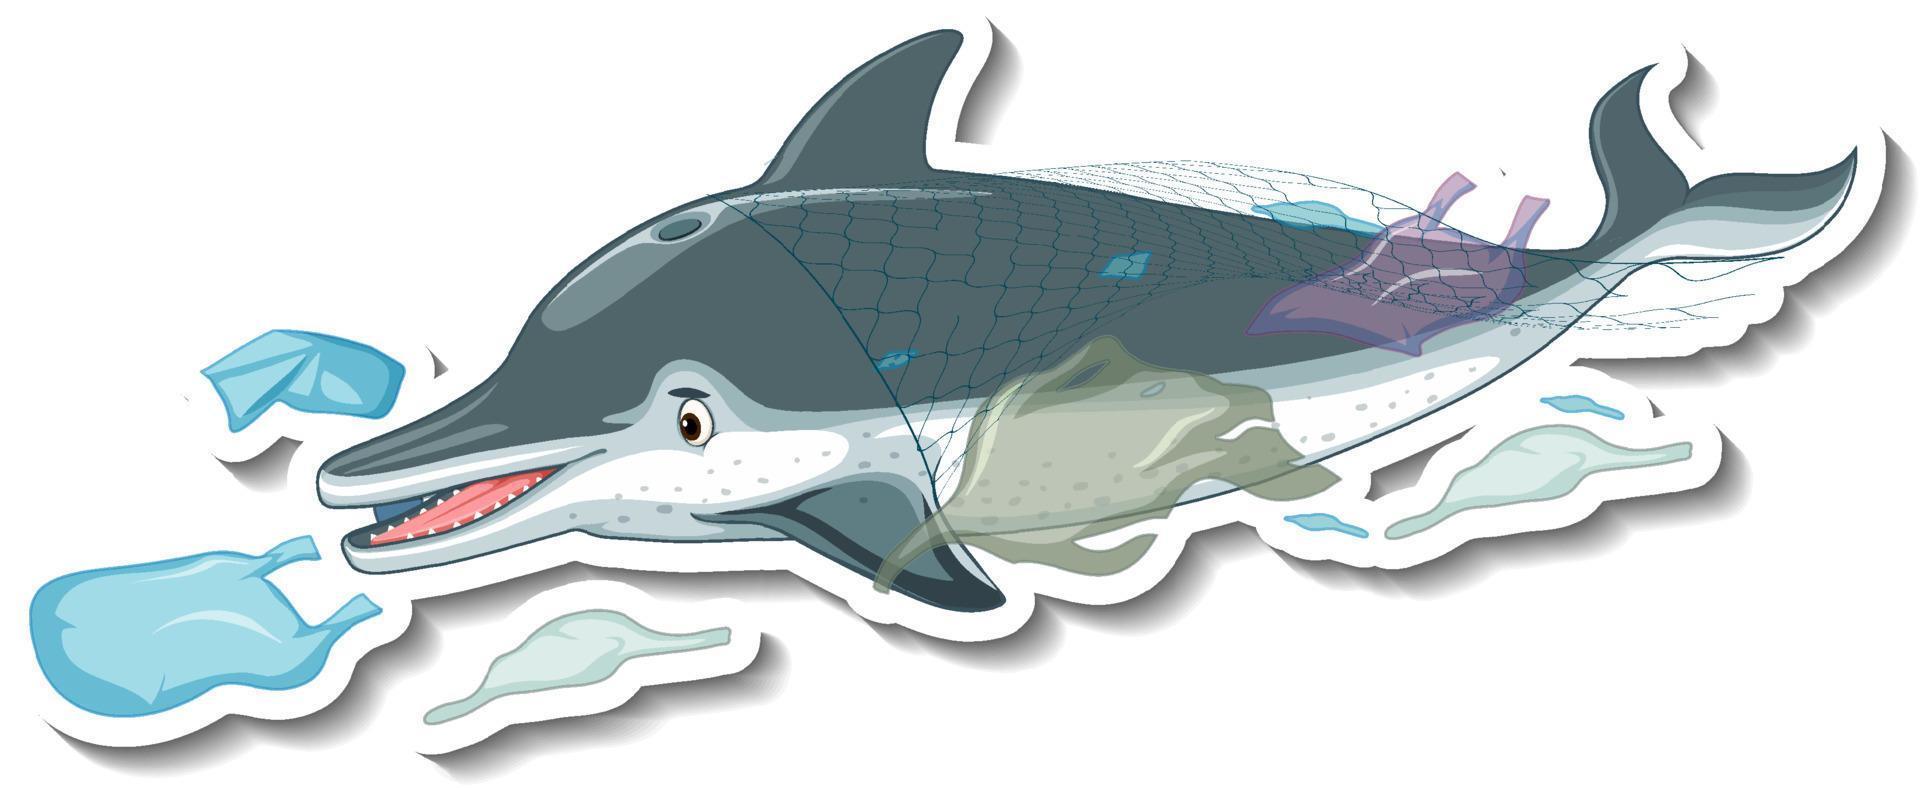 Dolphin stuck in plastic bags on white background vector